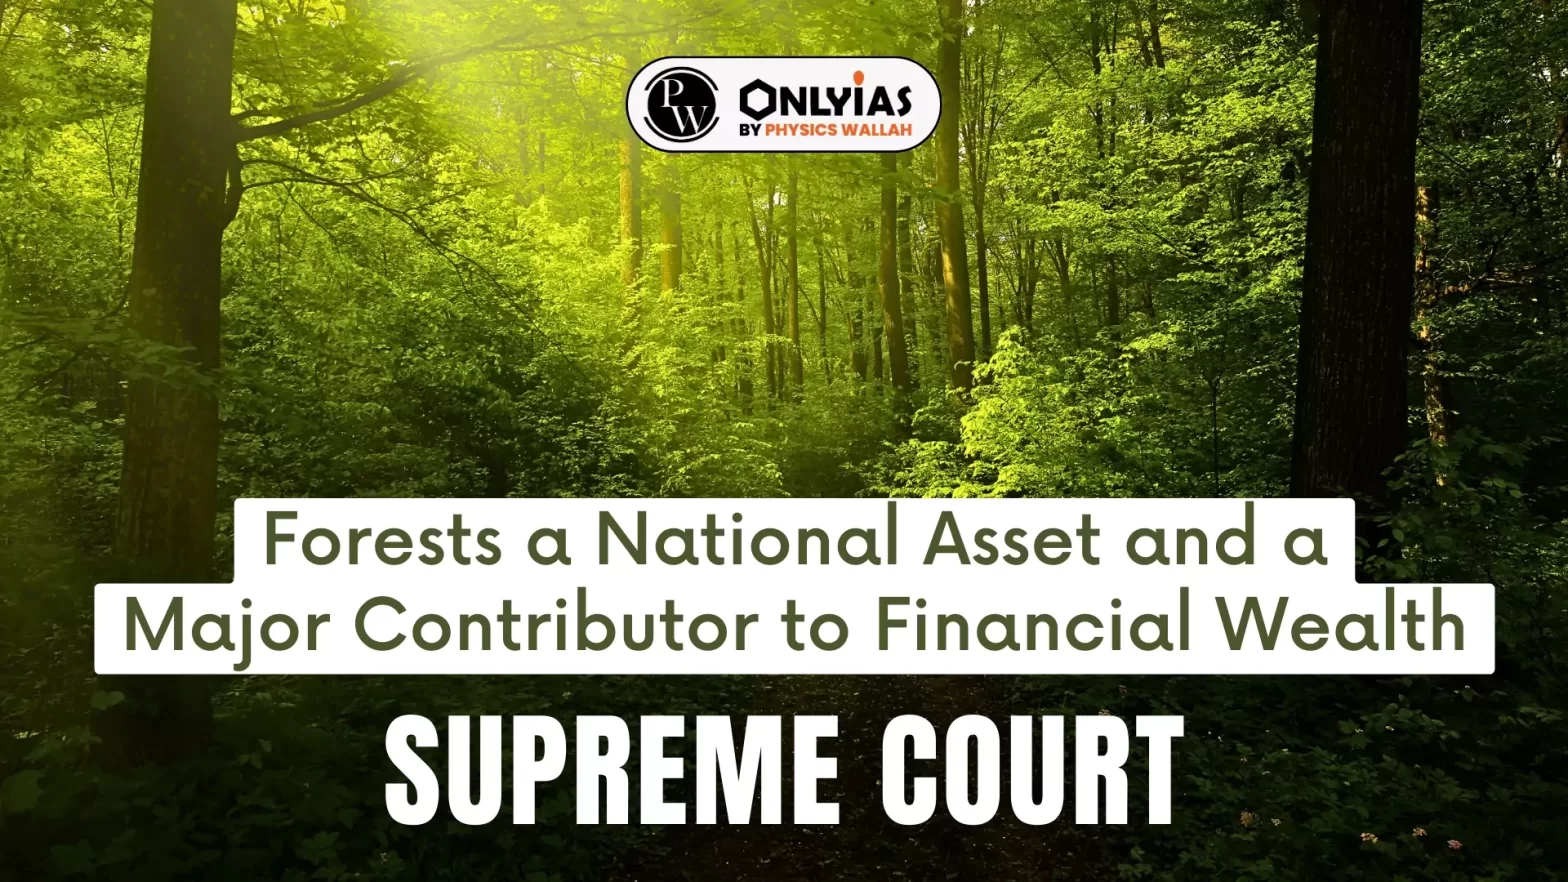 Forests a National Asset and a Major Contributor to Financial Wealth: Supreme Court